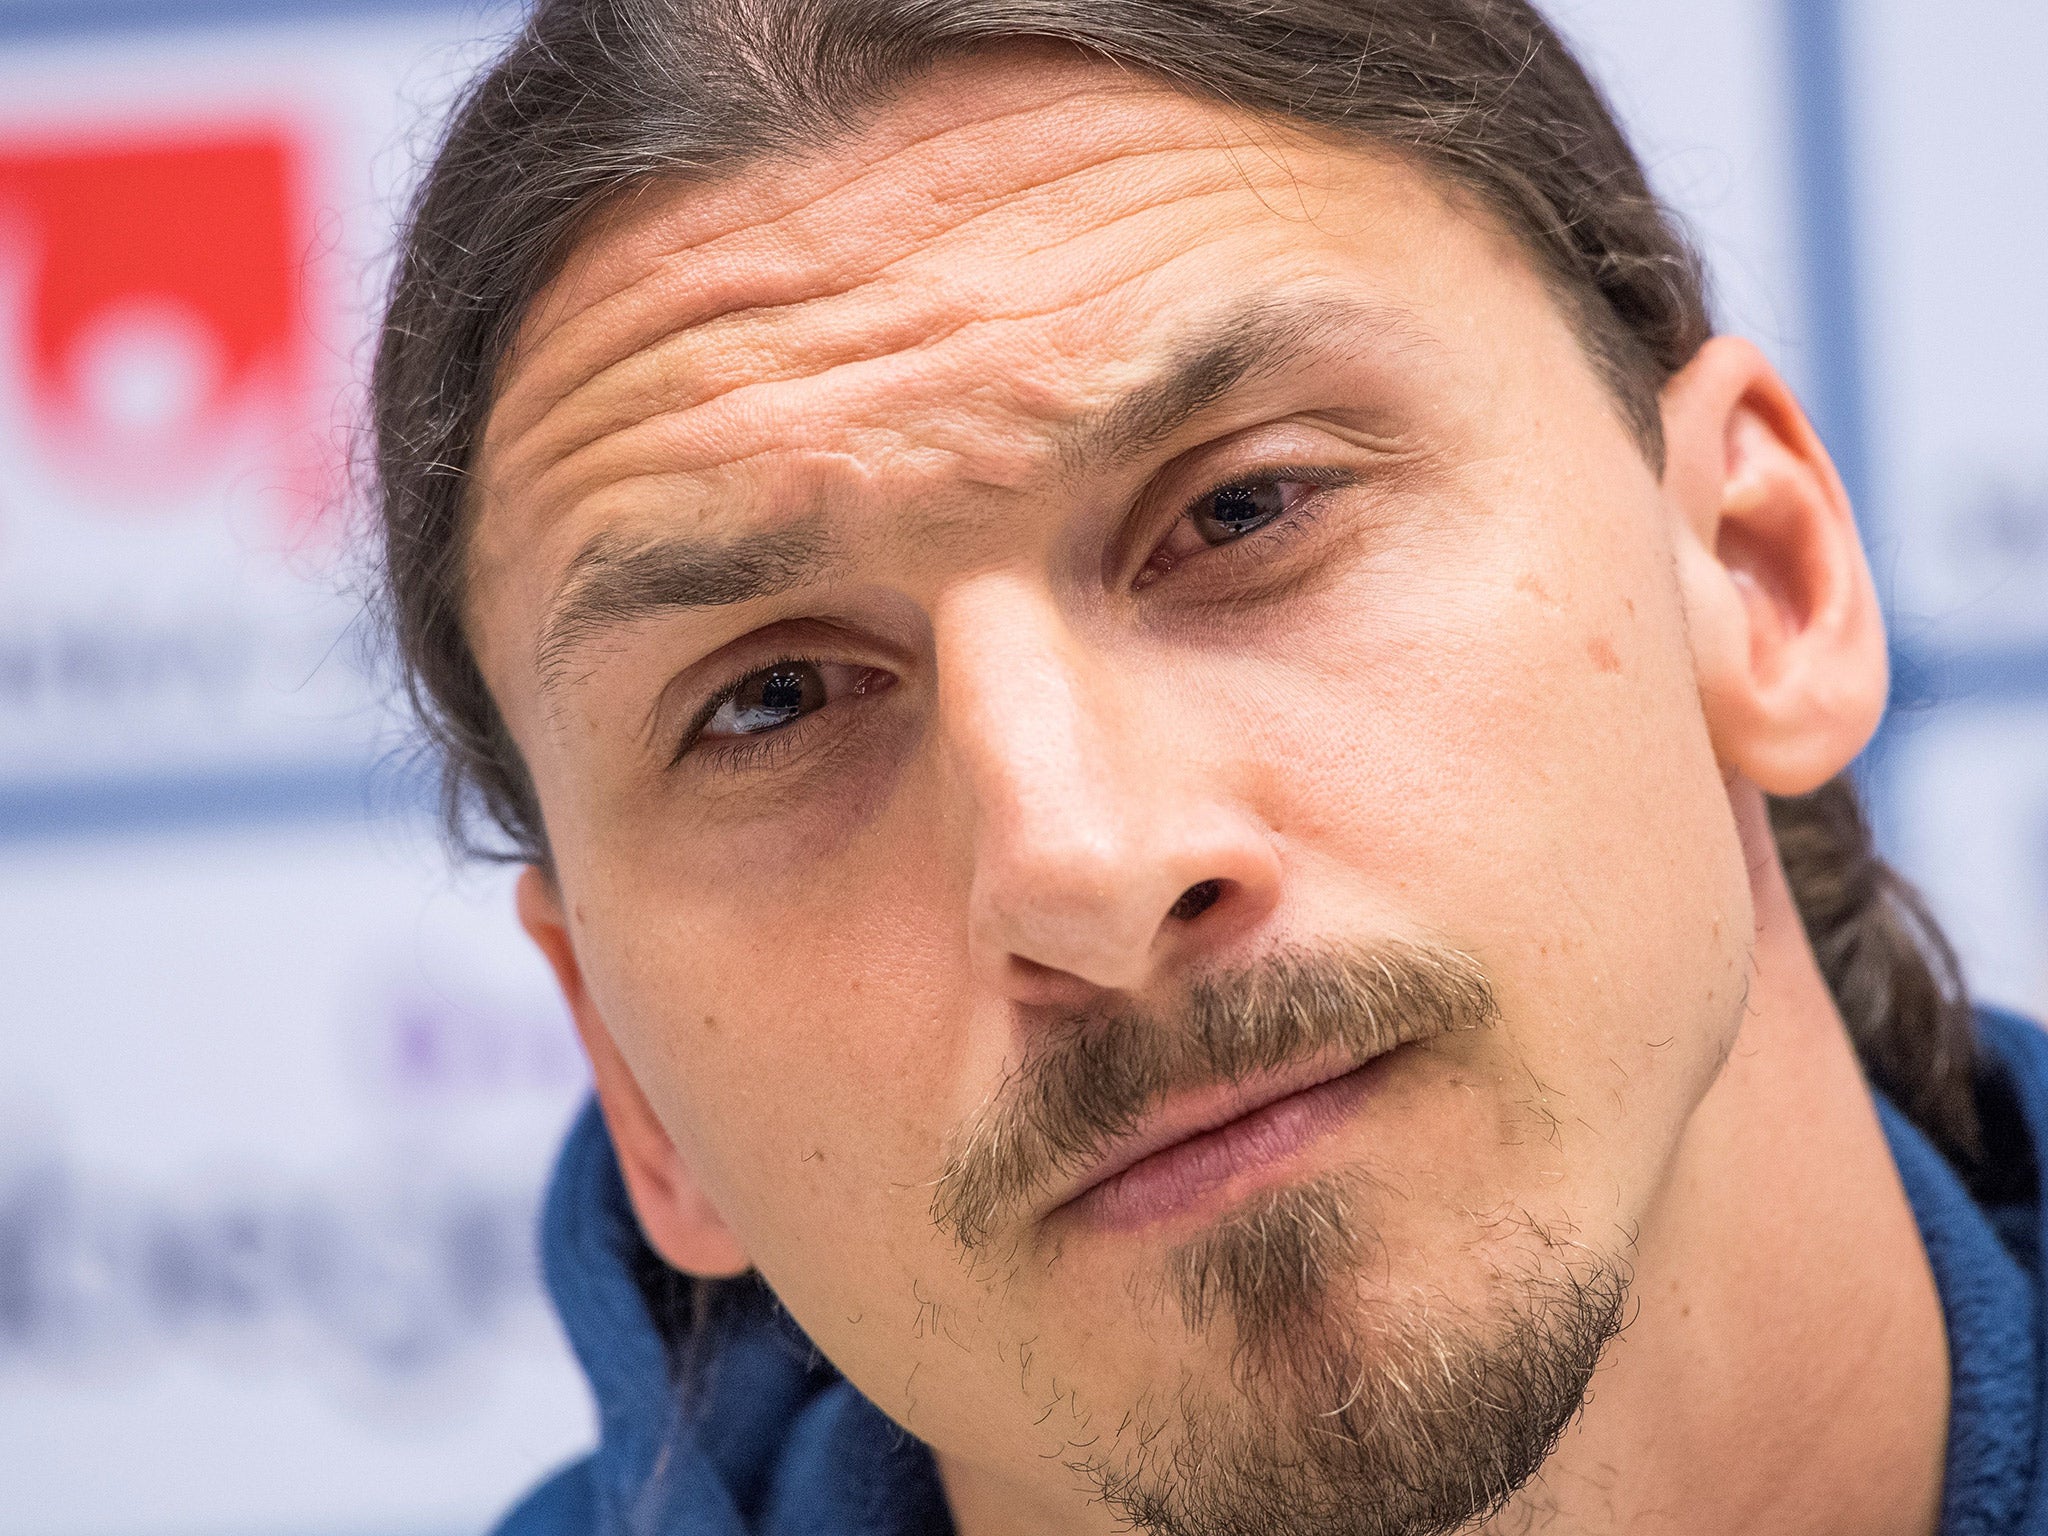 Zlatan Ibrahimovic attends a press conference after a Sweden training session